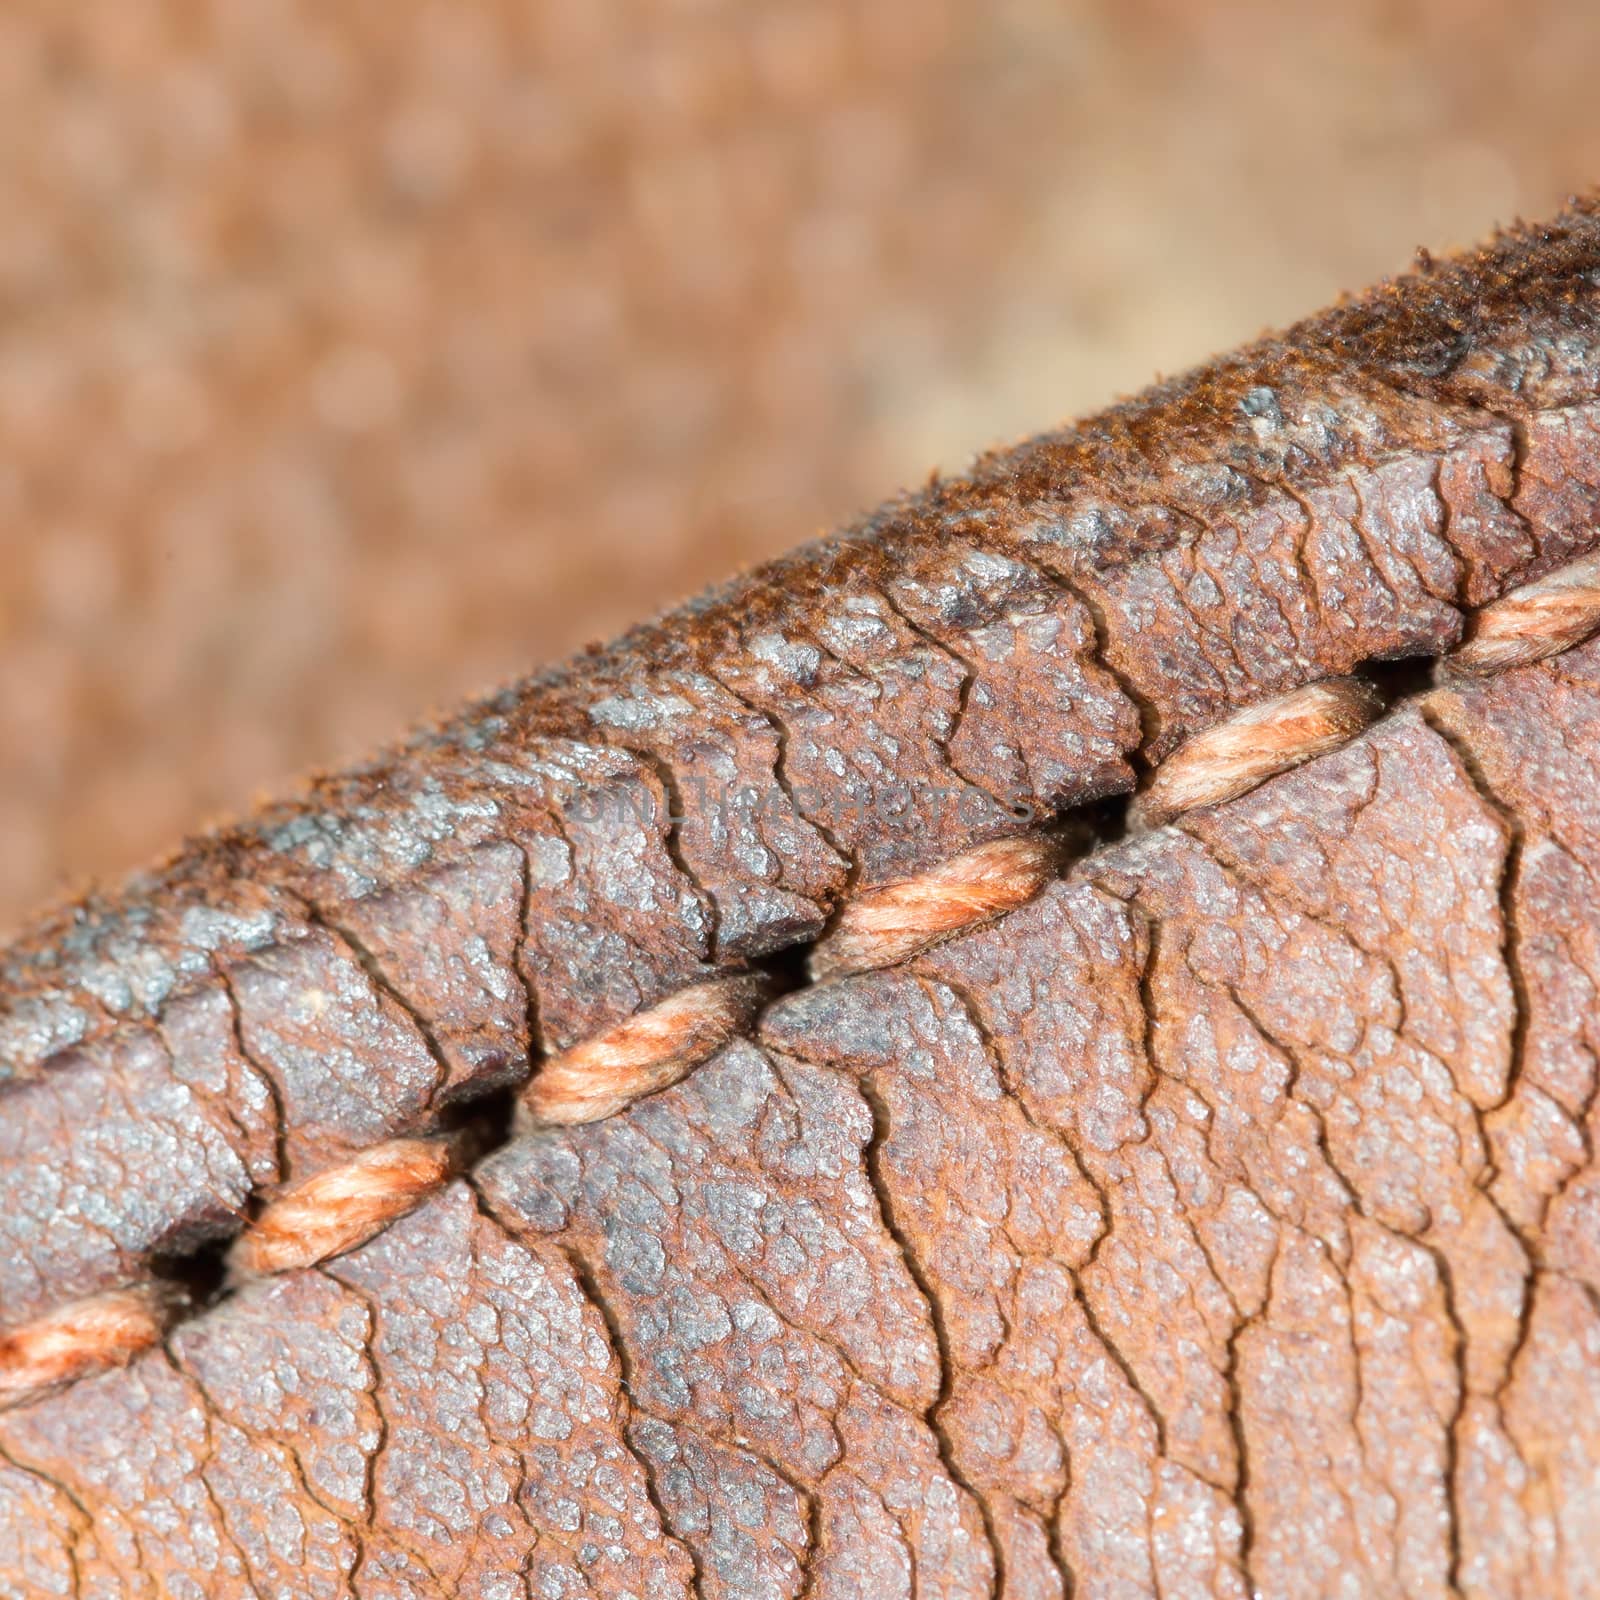 Close-up of old stiches in leather by michaklootwijk